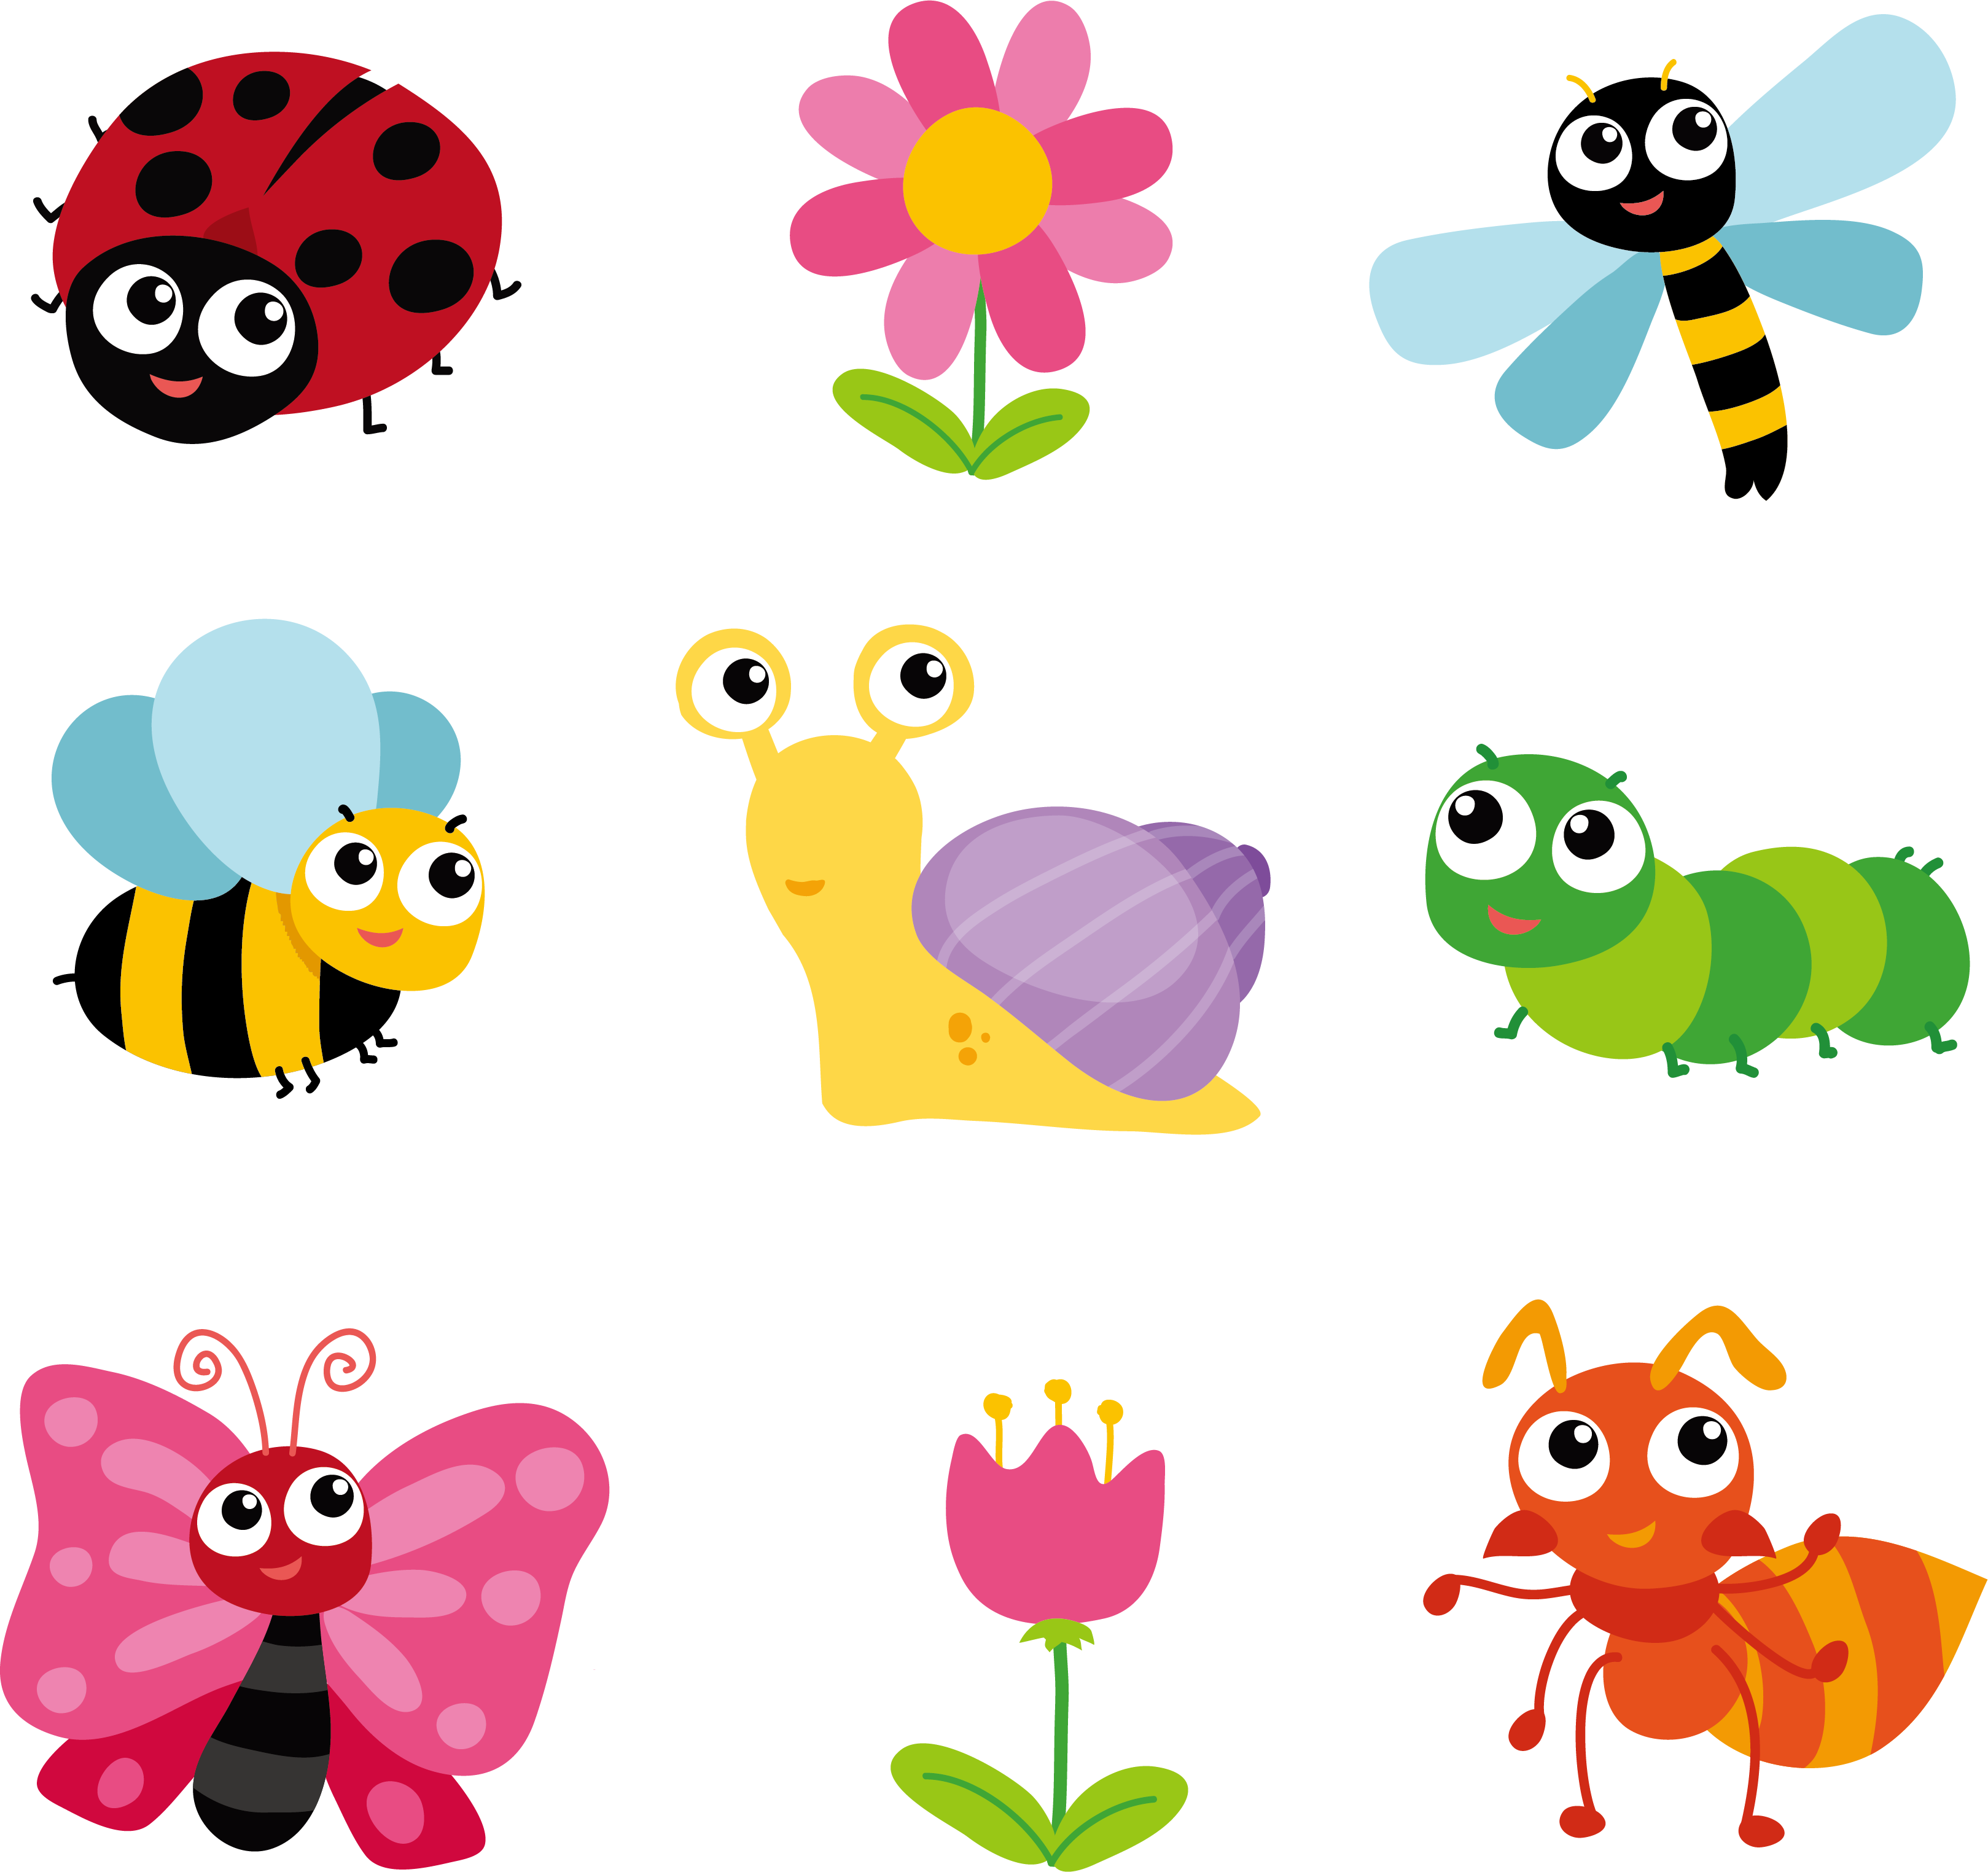 Insect Butterfly Ant Caterpillar - Toilet Potty Training Urinal Target Marker Sticker (3237x3048)